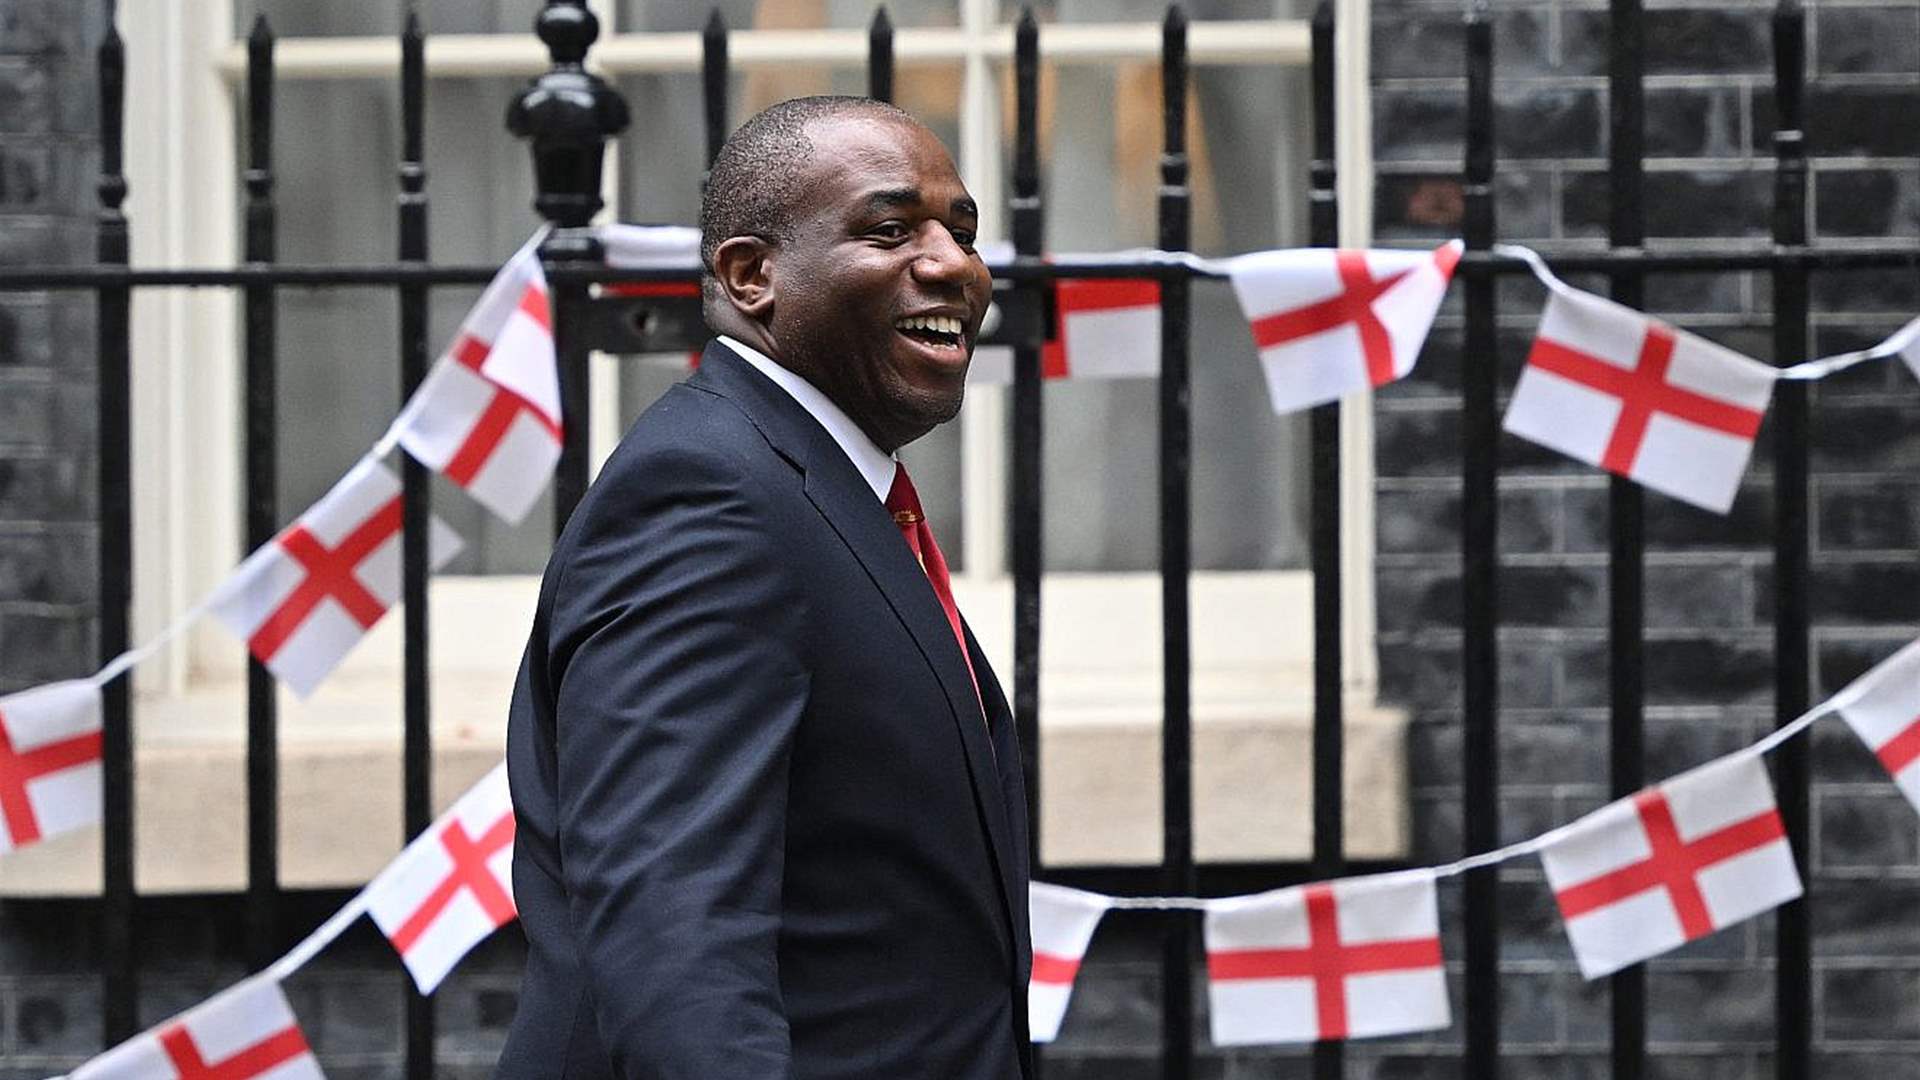 UK&#39;s new foreign minister Lammy seeks immediate ceasefire in Middle East trip